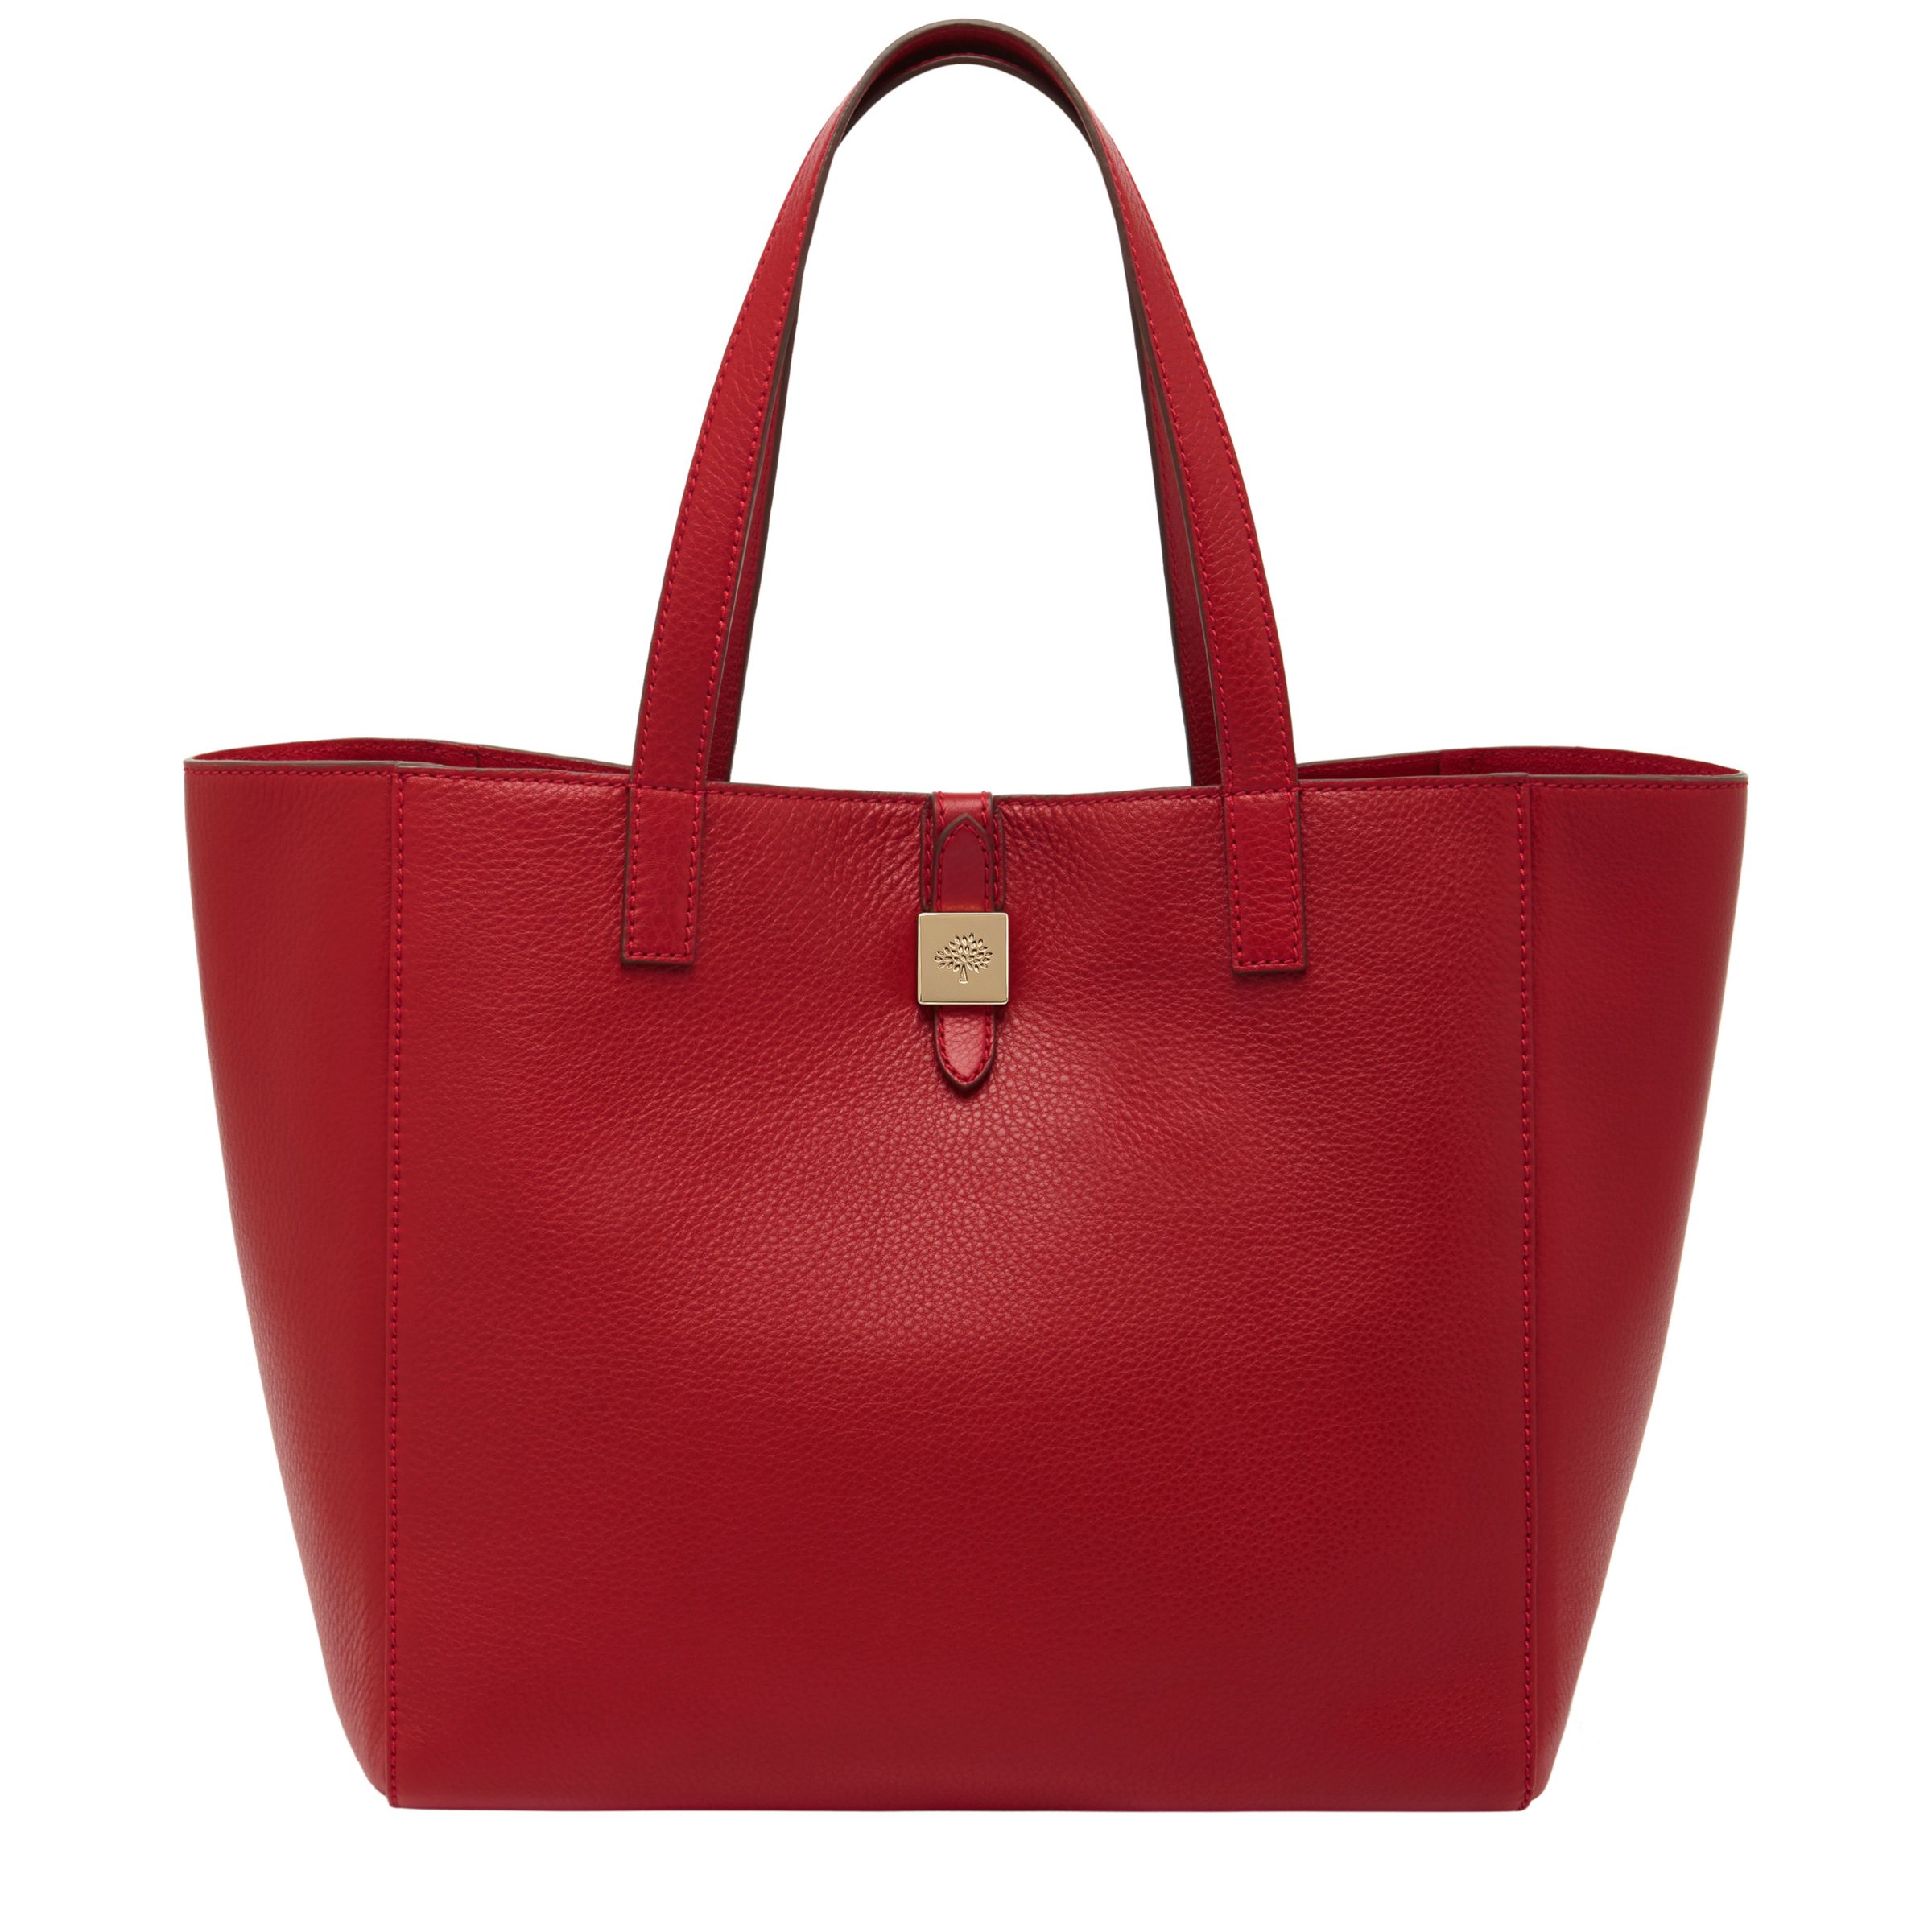 Mulberry Tessie Leather Tote Bag, Poppy